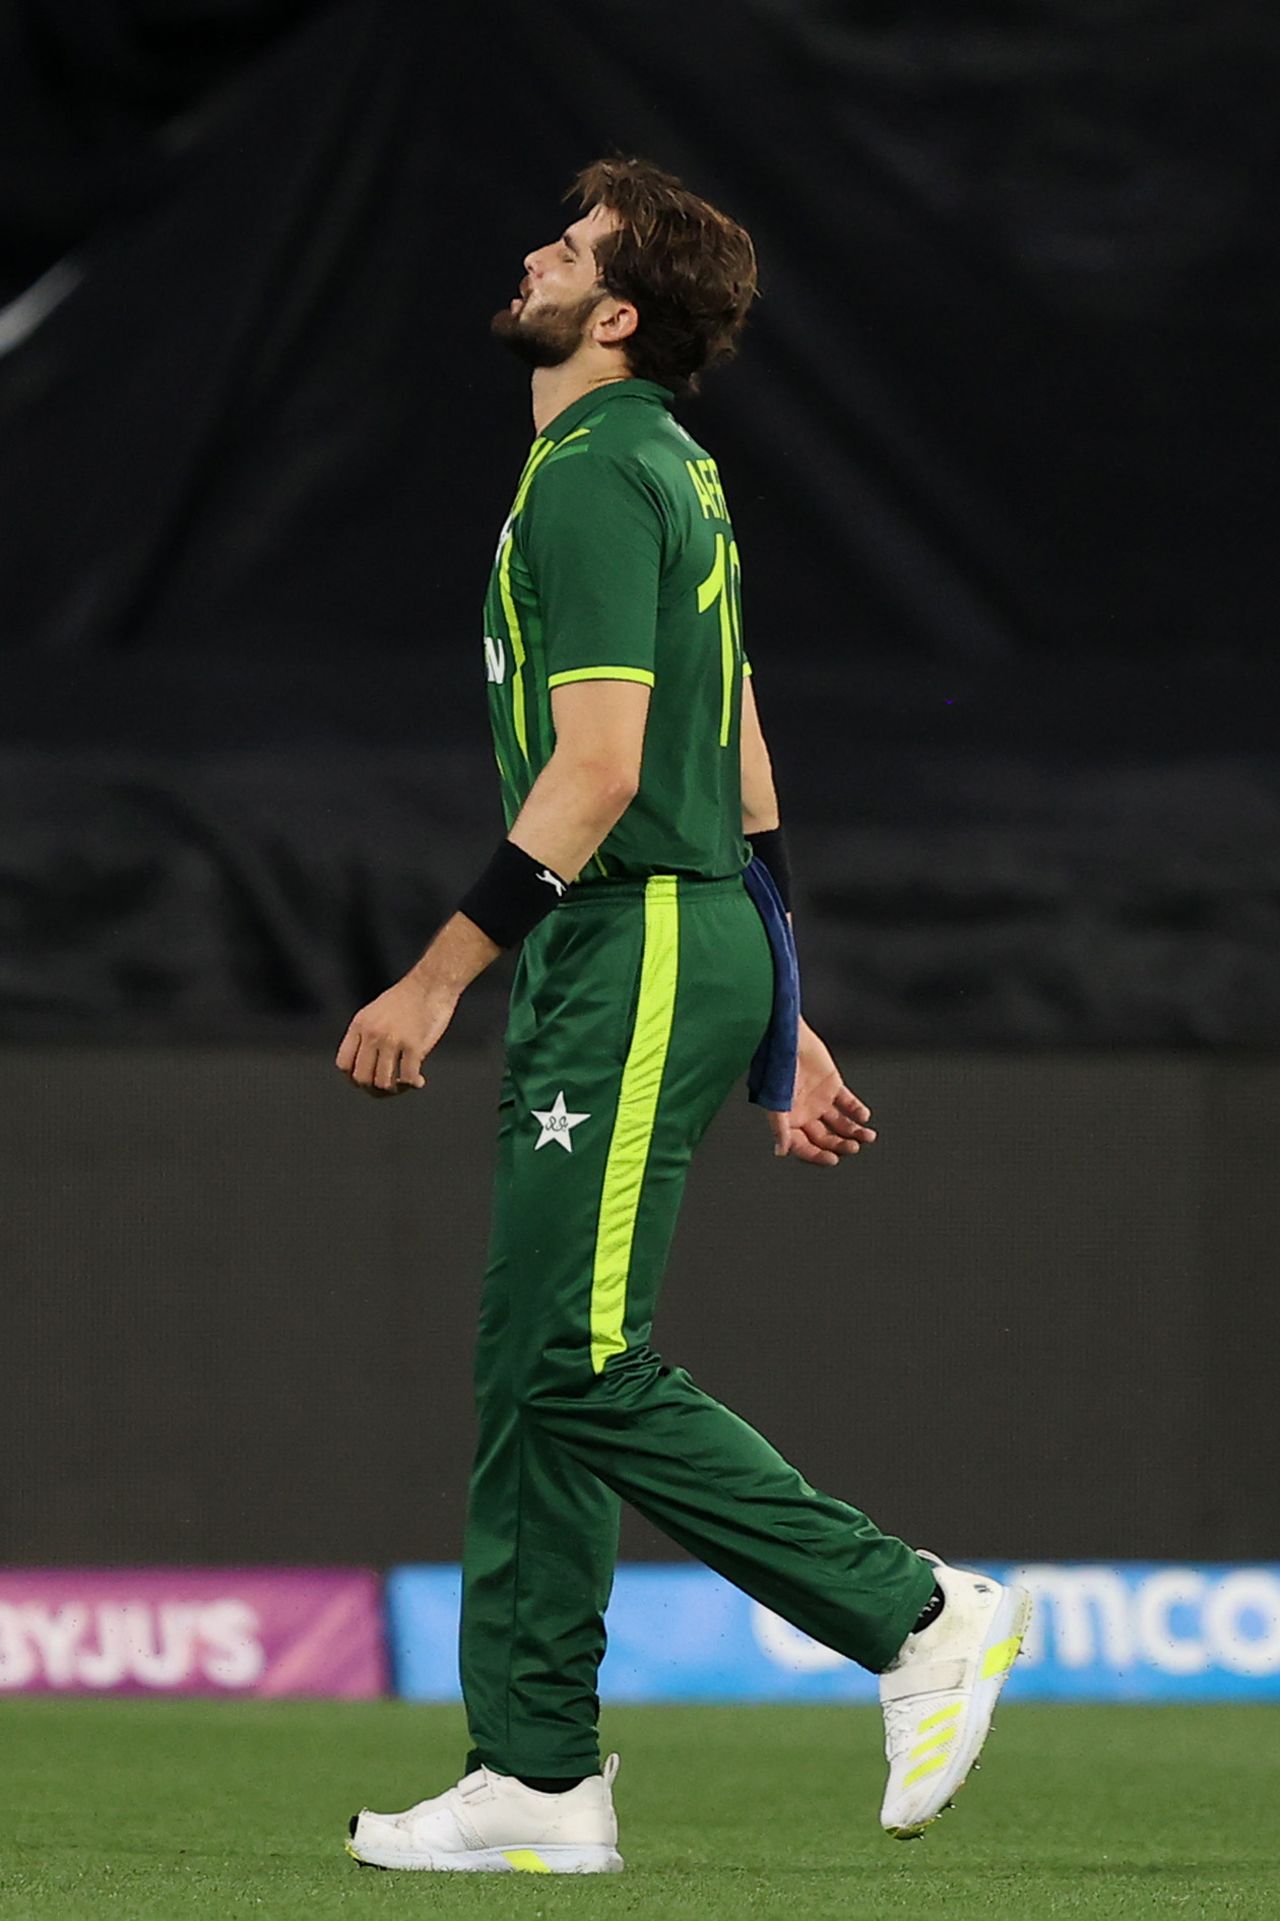 Shaheen Shah Afridi limps off the field after injuring his knee, England vs Pakistan, T20 World Cup, final, November 13, 2022